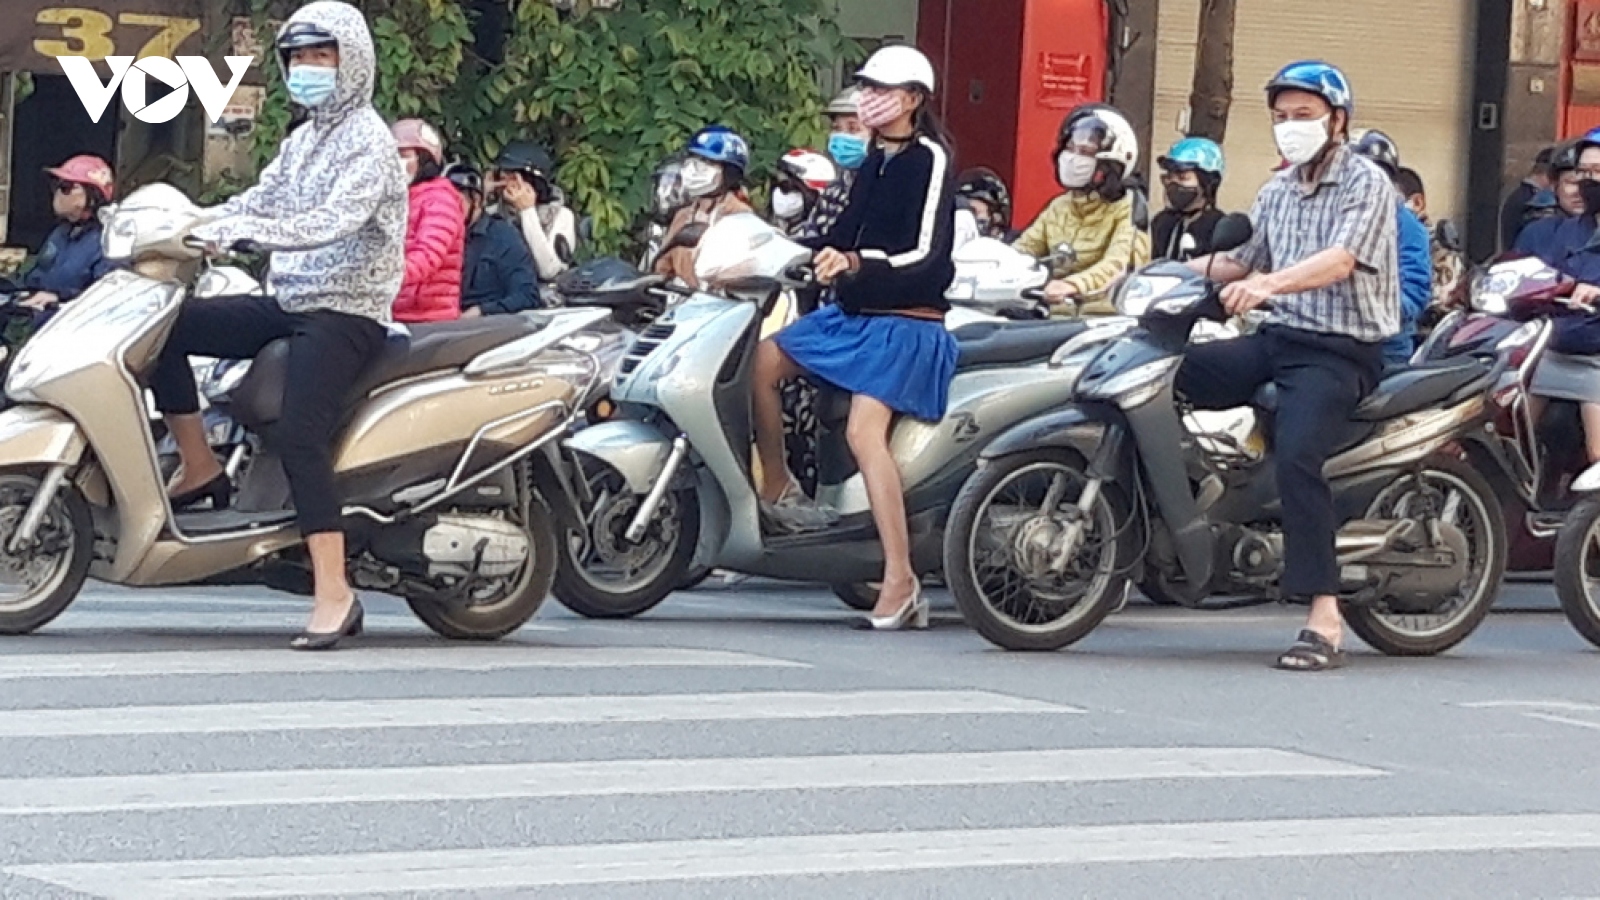 Locals follow face mask rules in public areas throughout Hanoi